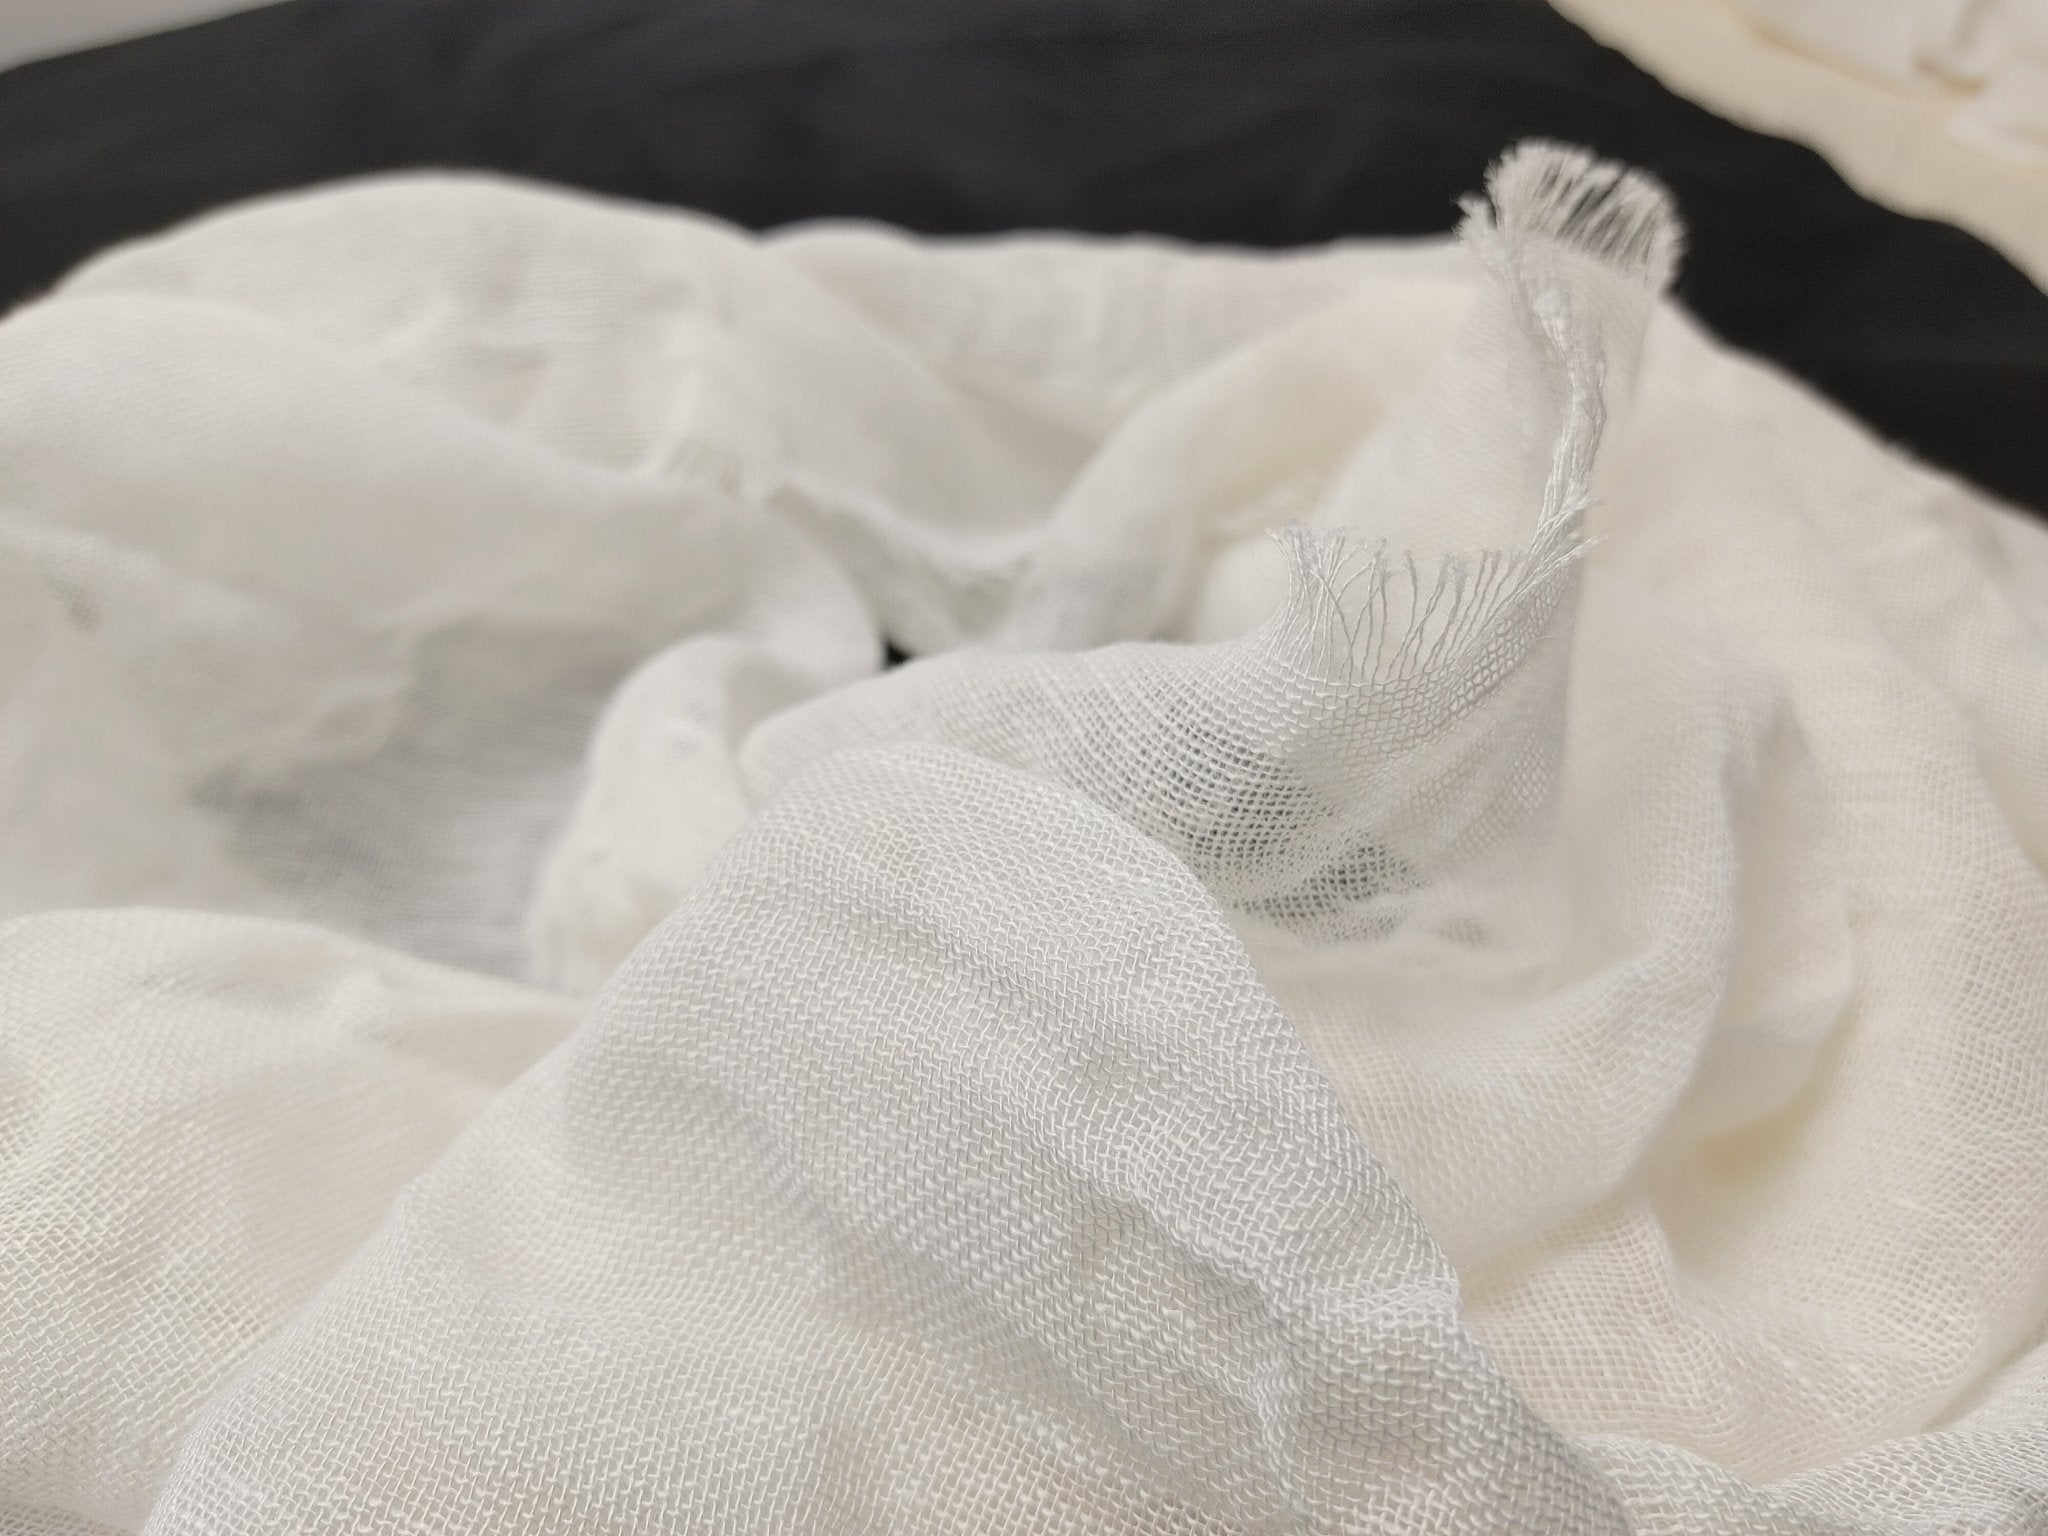 White Sheer Linen Rayon Ramie Mesh Fabric with Wrinkle Effect 2783 - The Linen Lab - White